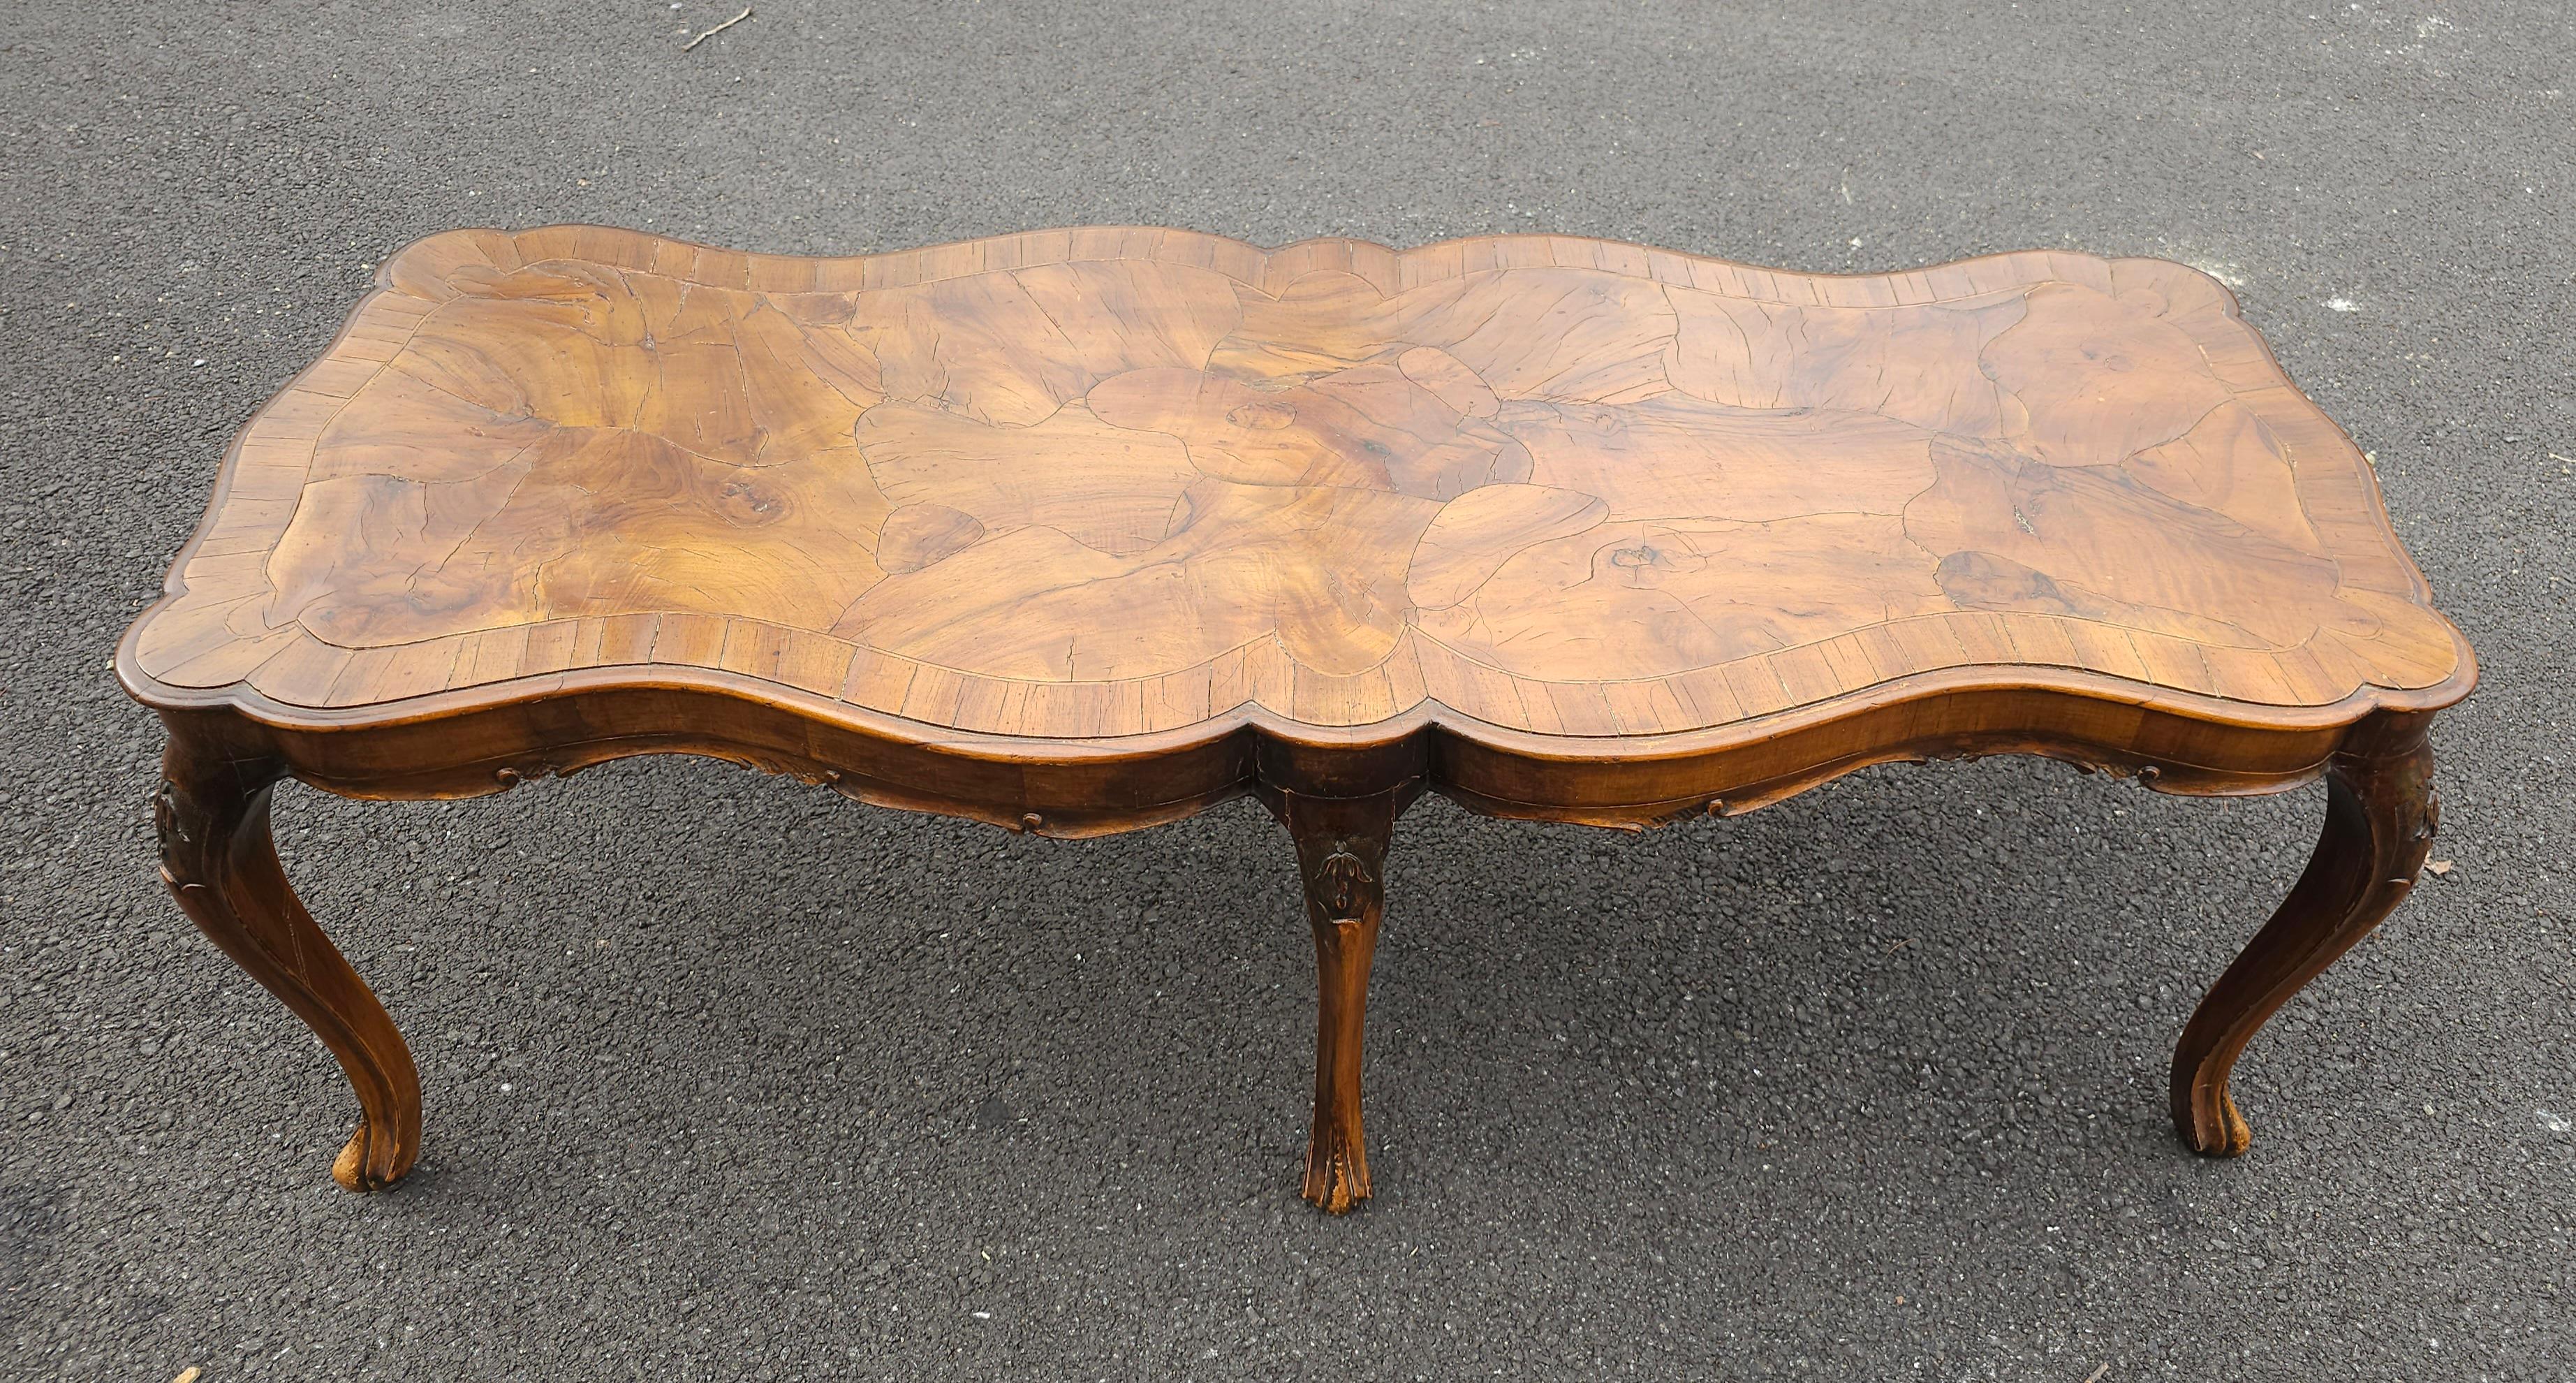 Carved Renaissance Revival Walnut Burl and Fruitwood Cocktail Table For Sale